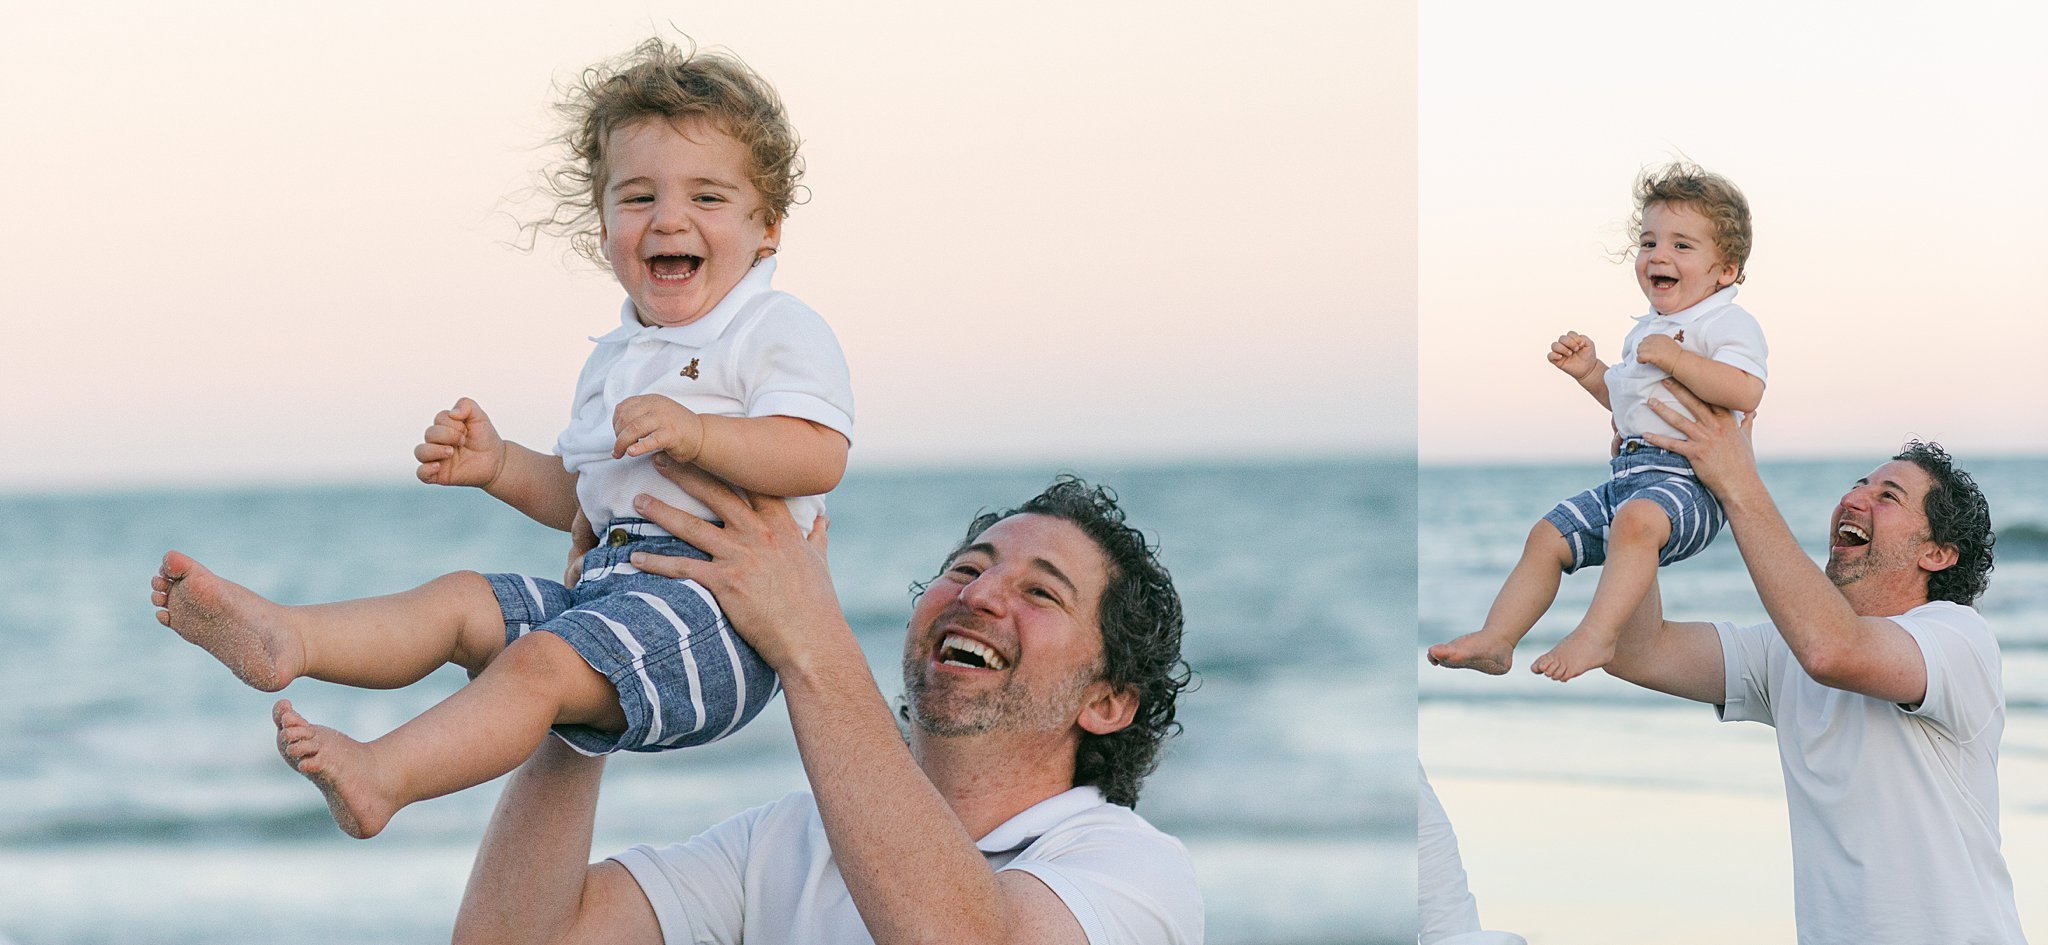 Katherine_Ives_Photography_Chod_Hilton_Head_Extended_Family_Session_127.JPG